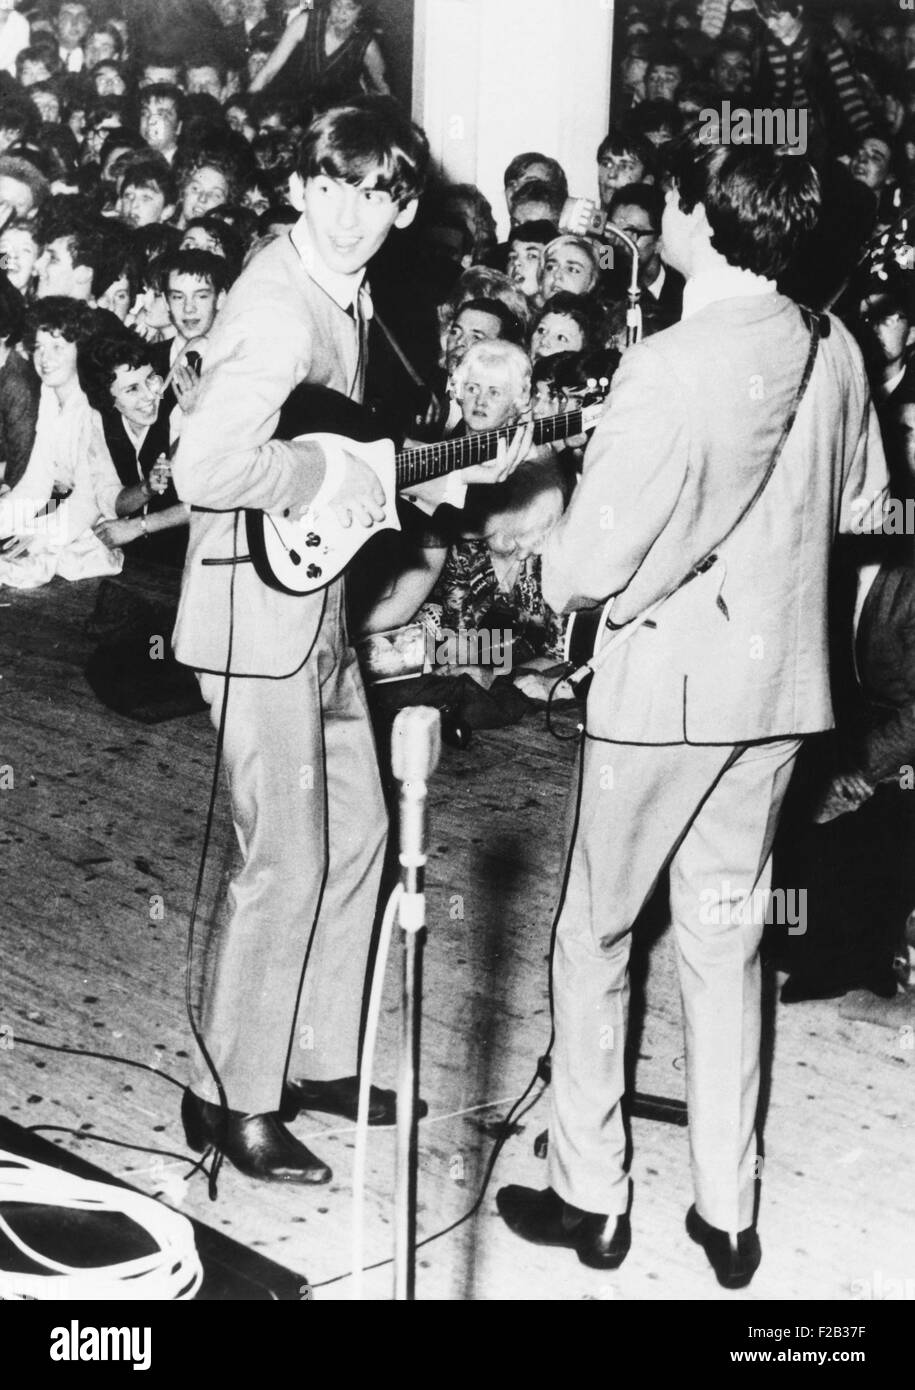 George Harrison (left) and Paul McCartney, of the Beatles perform in Manchester, England. Nov. 11, 1963. The original caption of this news photo described the singers as 'fringed topped'. They wear 'Mod' styled collarless jackets with dark piping and 'Chelsea boots'. (CSU 2015 7 275) Stock Photo